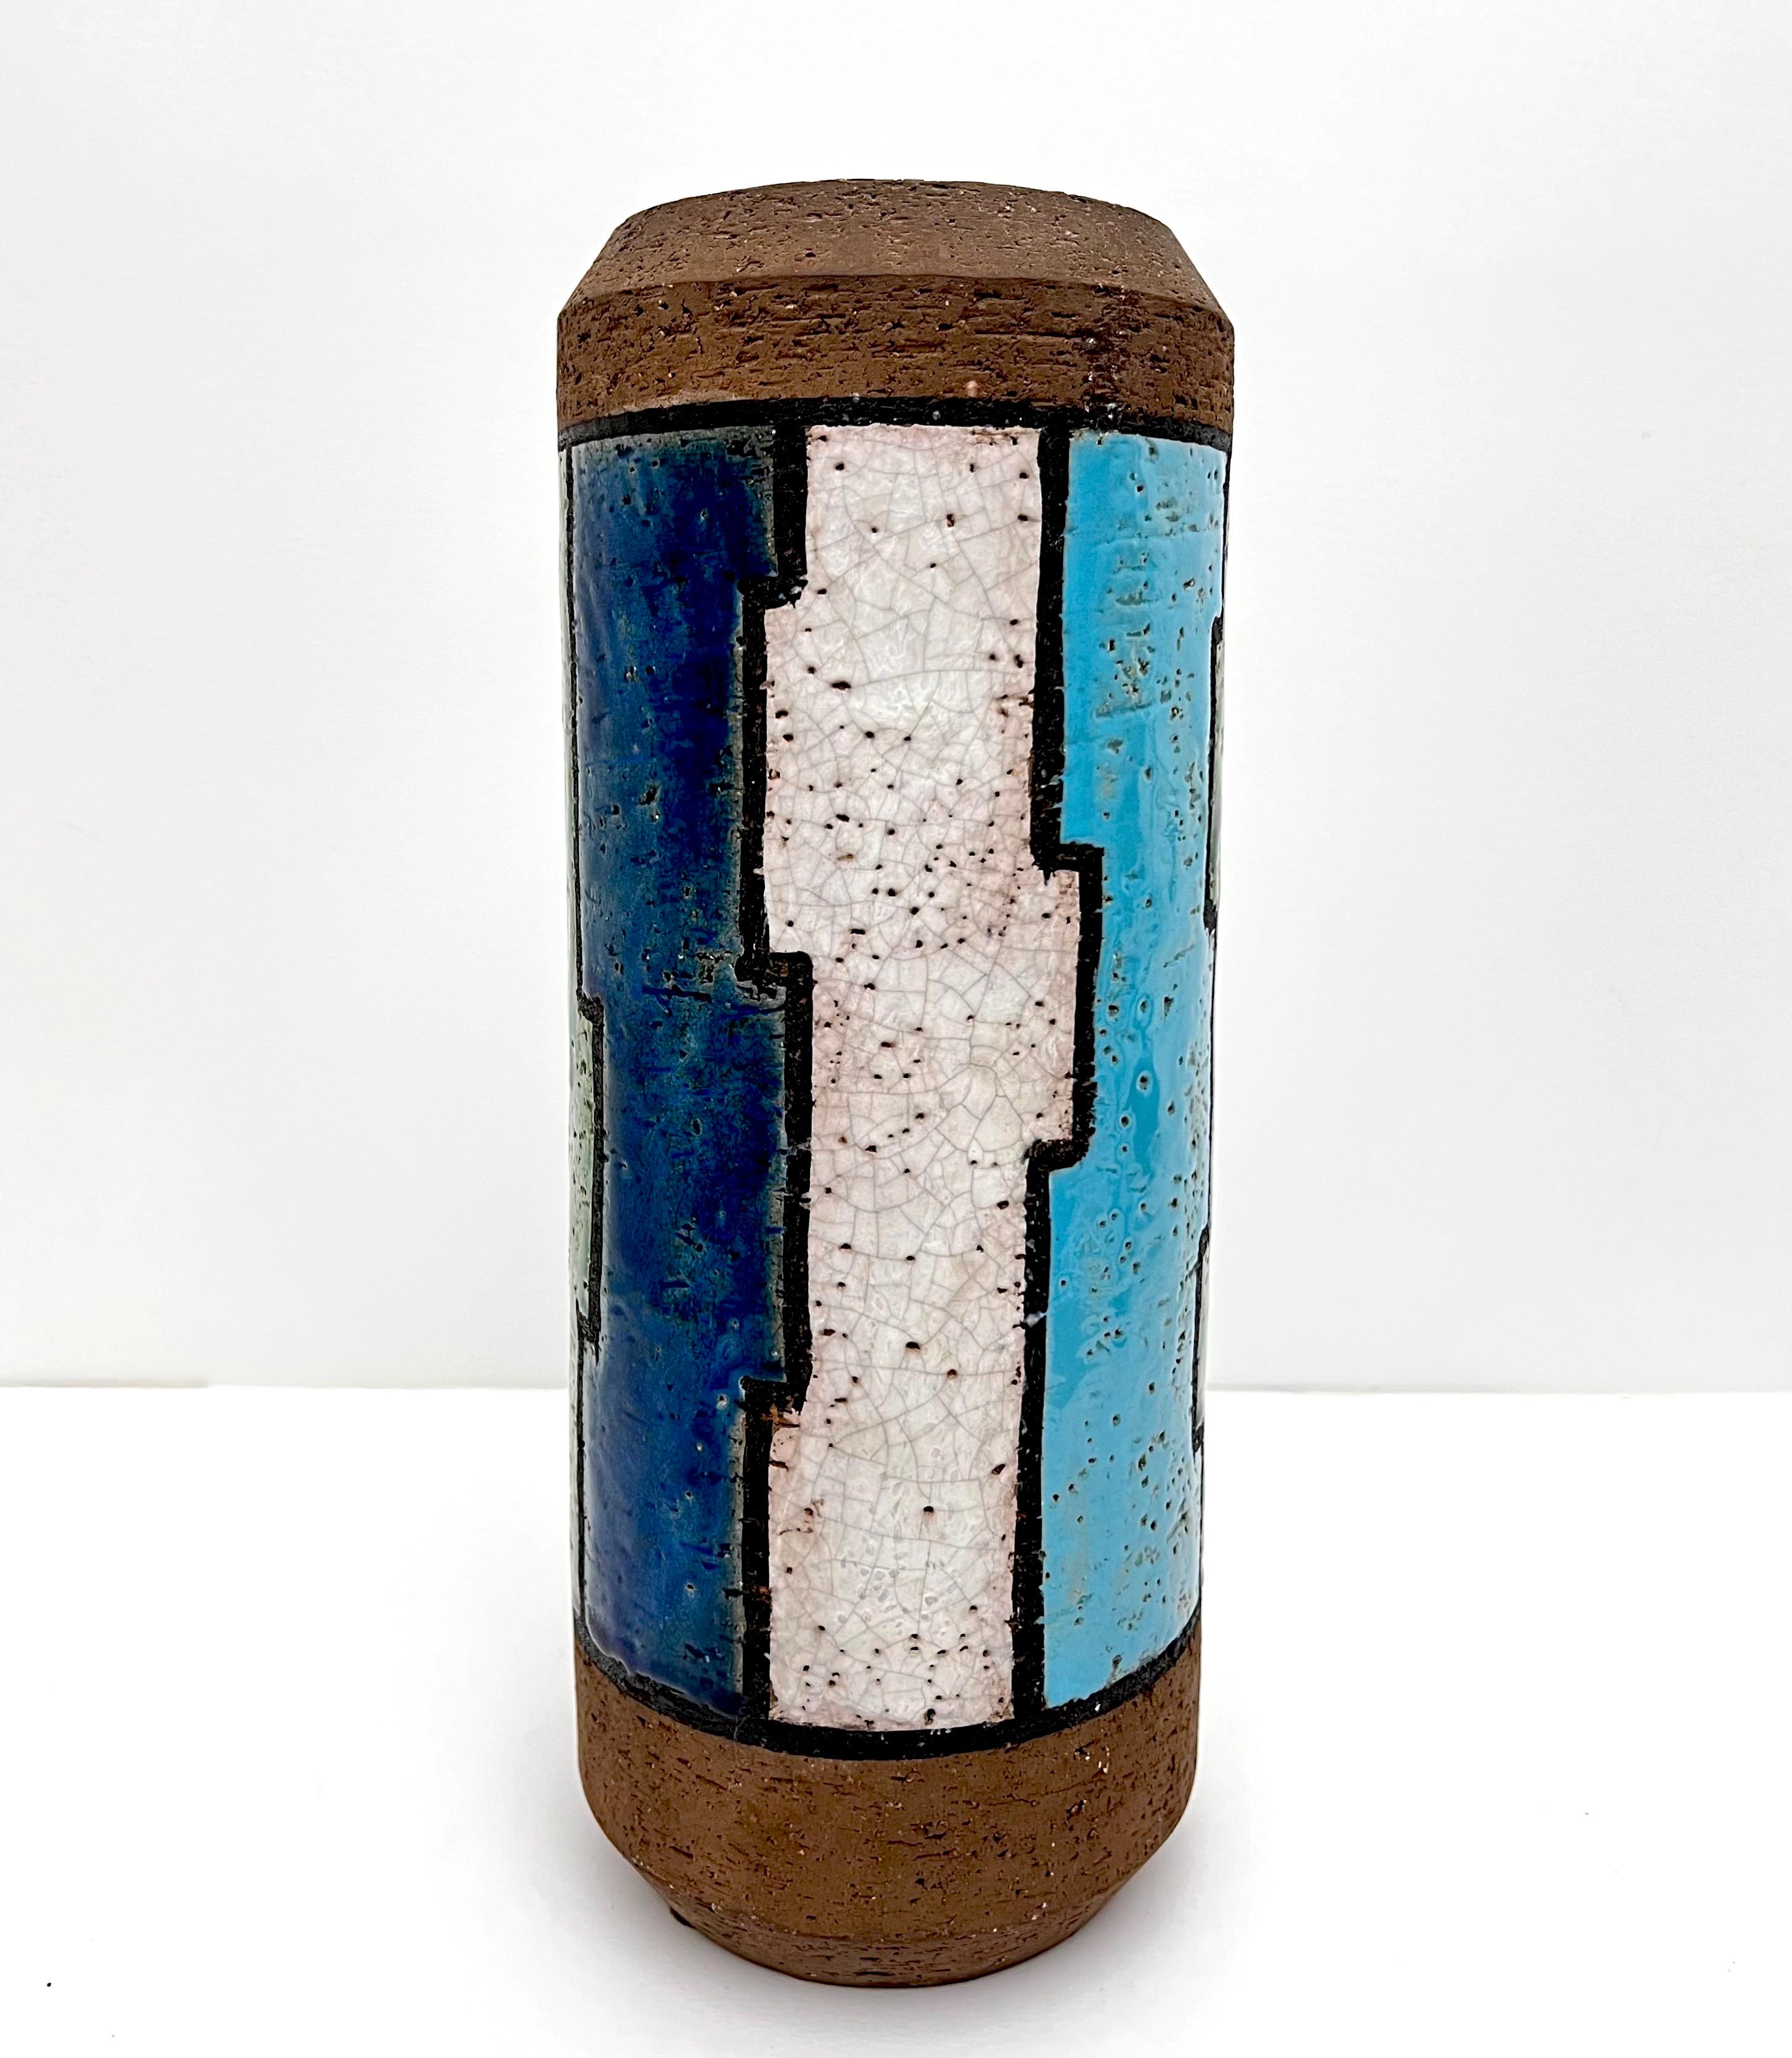 Very Geometric and Fabulous Large 60's Bitossi Lineas Rotas Vase by Aldo Londi.  Great colors of aqua, green, navy and white mixed with a chocolate brown coarse matte clay body is from Londi's Líneas Rotas (Broken lines) series making this quite the